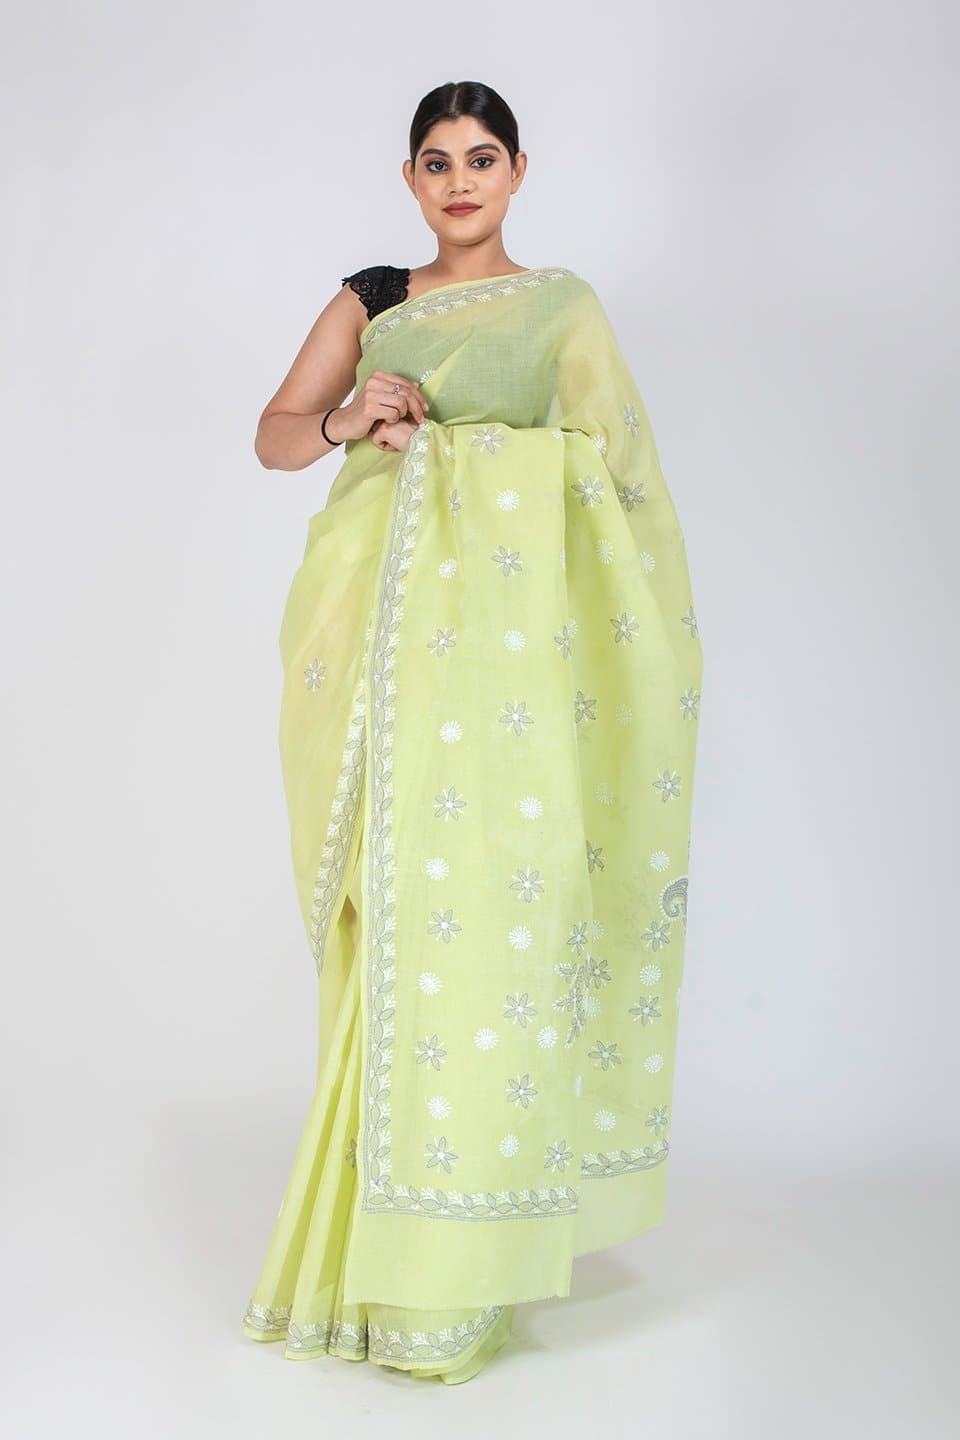 Lucknow Chikan Emporium Cotton leaf  Green Colour Saree With Blouse 